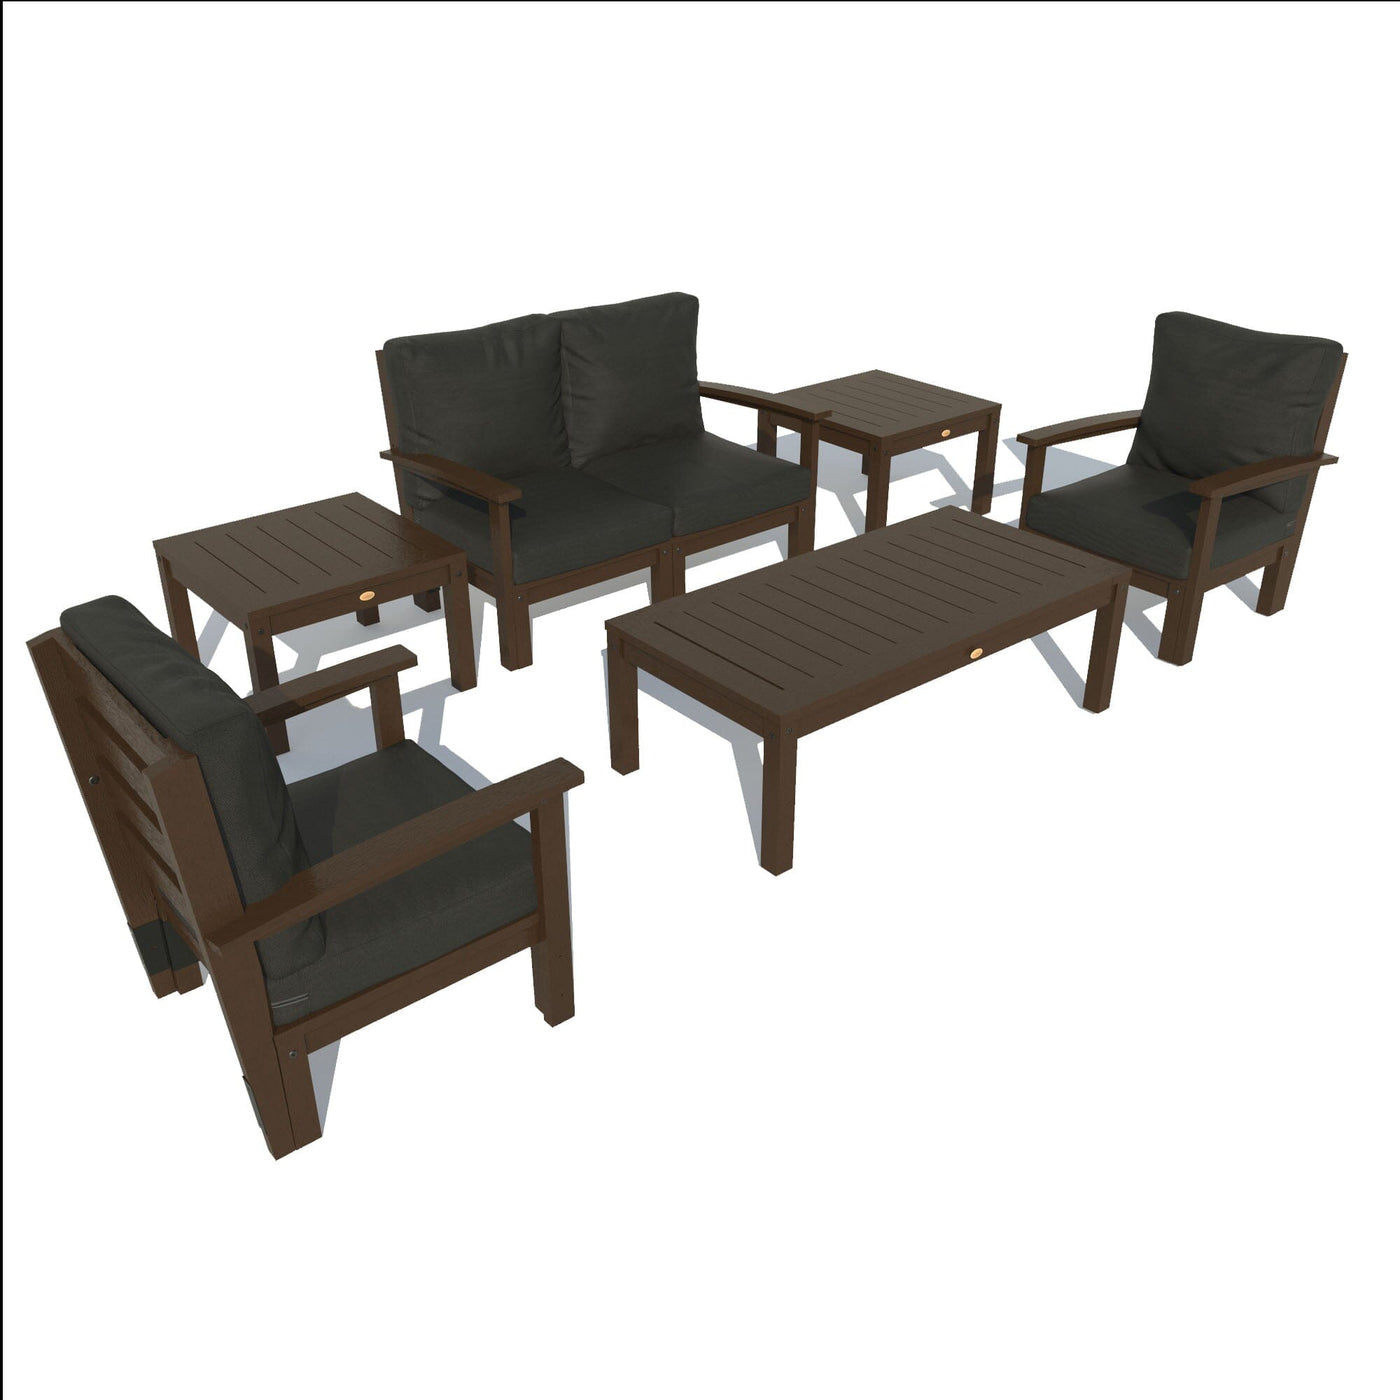 Bespoke Deep Seating: Loveseat, Set of 2 Chairs, Conversation Table, and 2 Side Tables Deep Seating Highwood USA Jet Black Weathered Acorn 